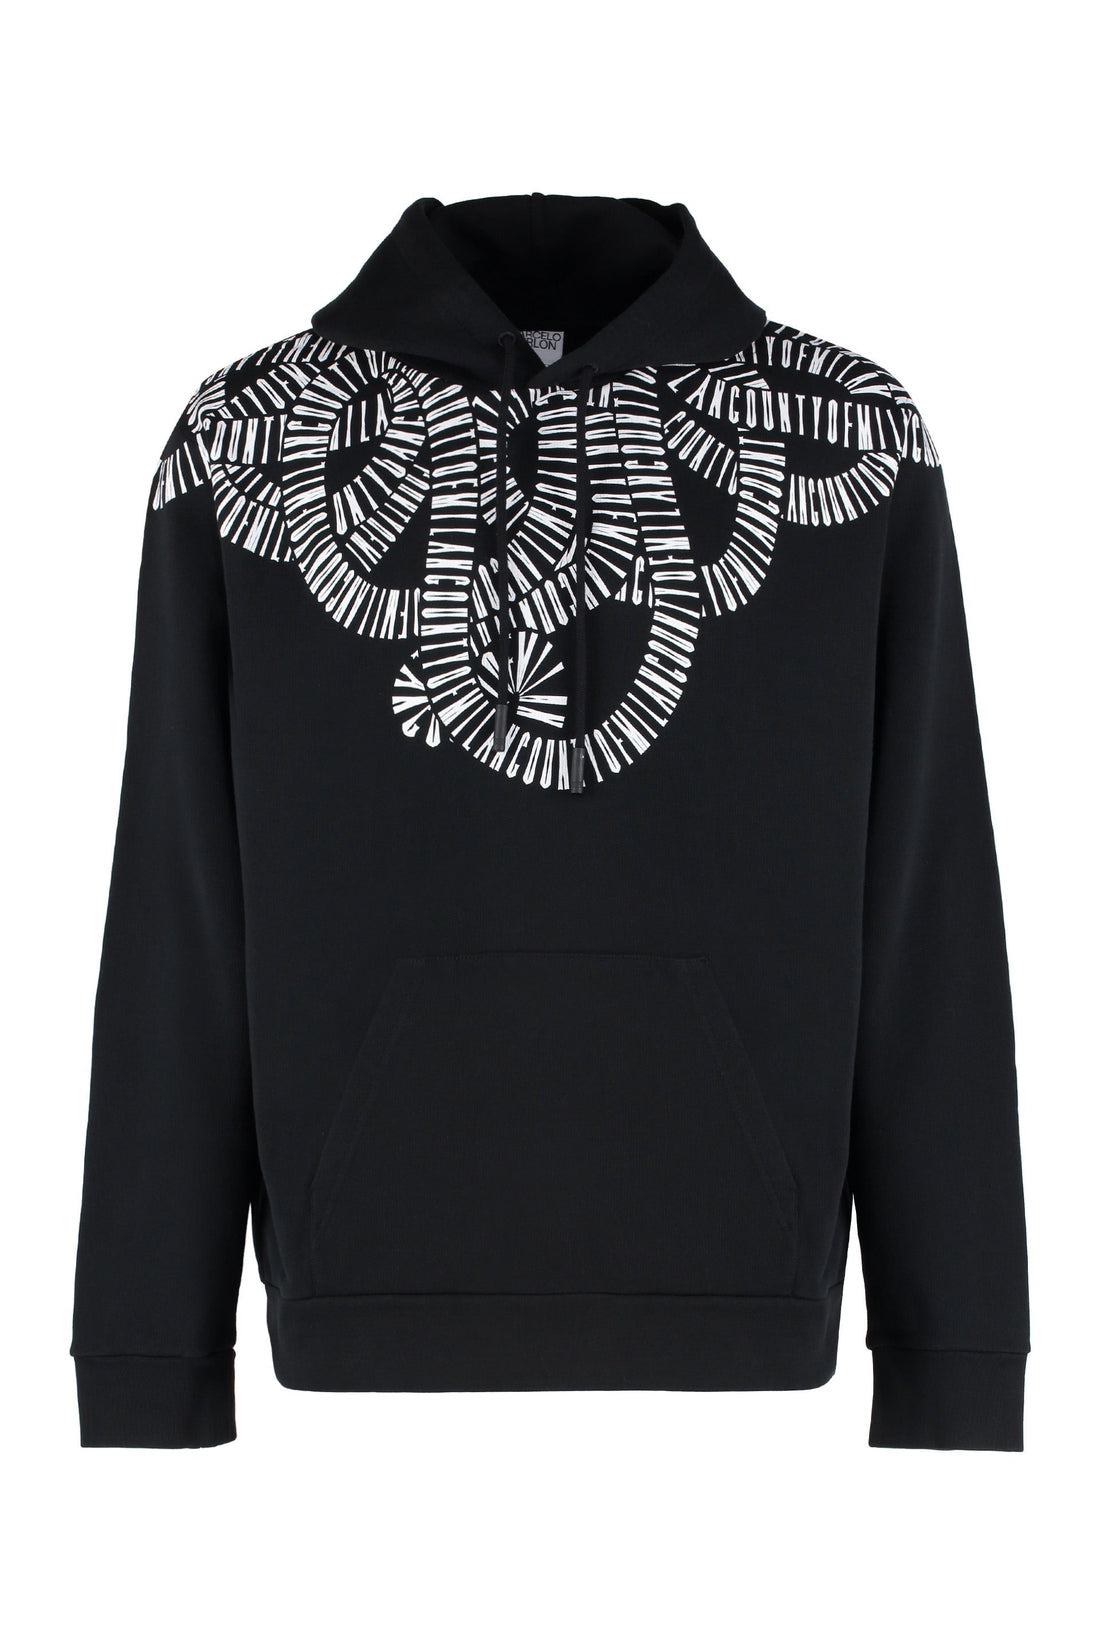 Marcelo Burlon County of Milan-OUTLET-SALE-Printed hoodie-ARCHIVIST